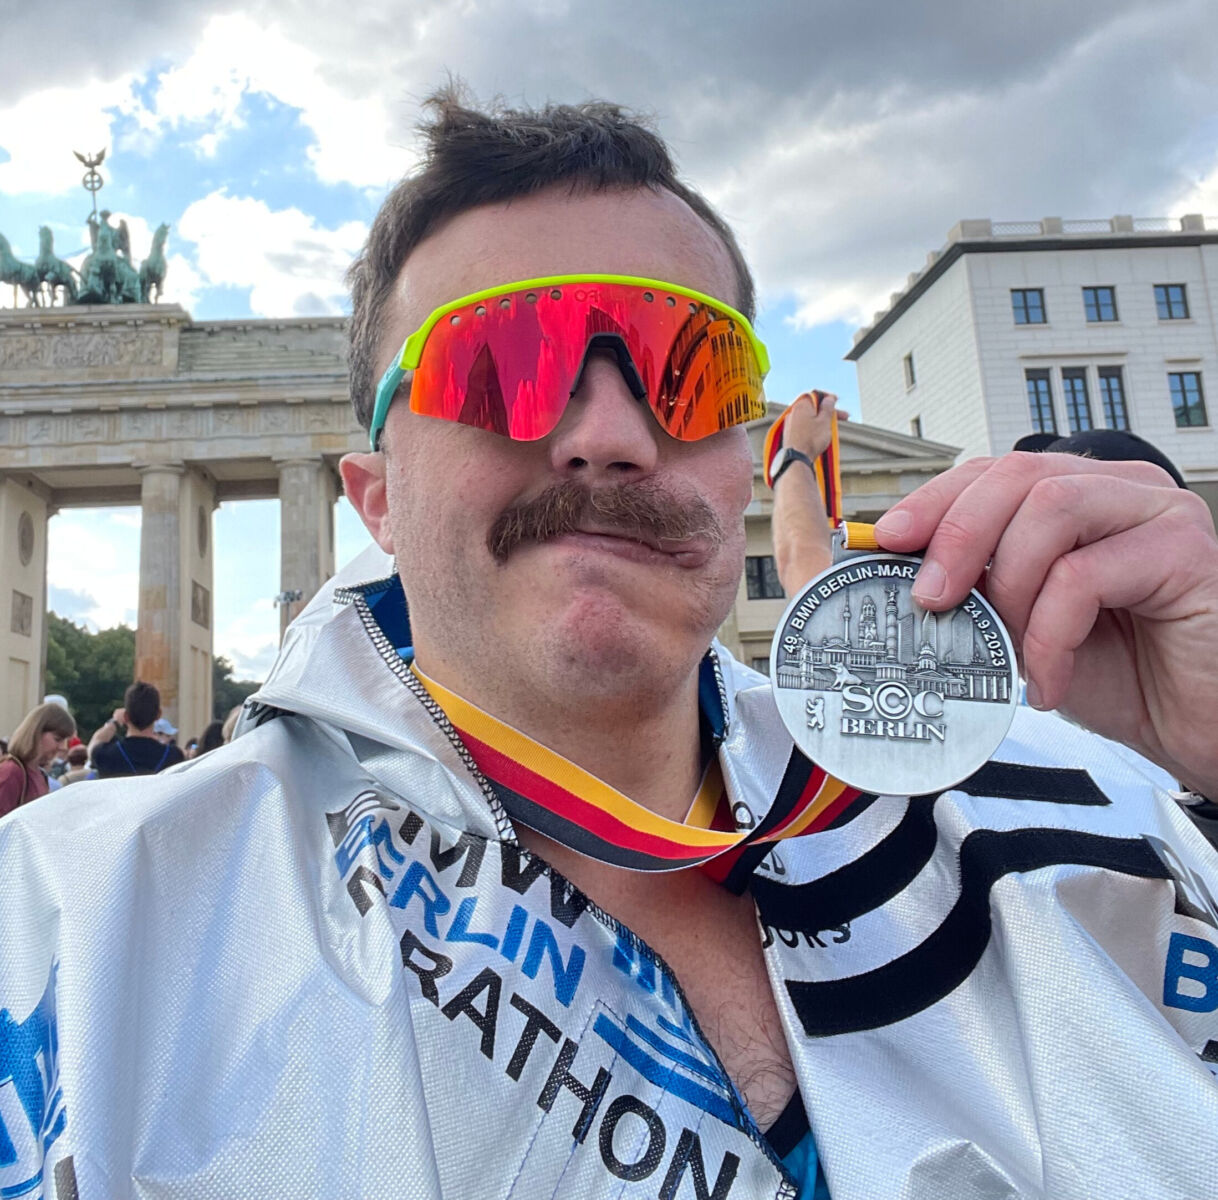 A man with a mustache wearing colorful sunglasses and a marathon medal standing in front of the brandenburg gate.